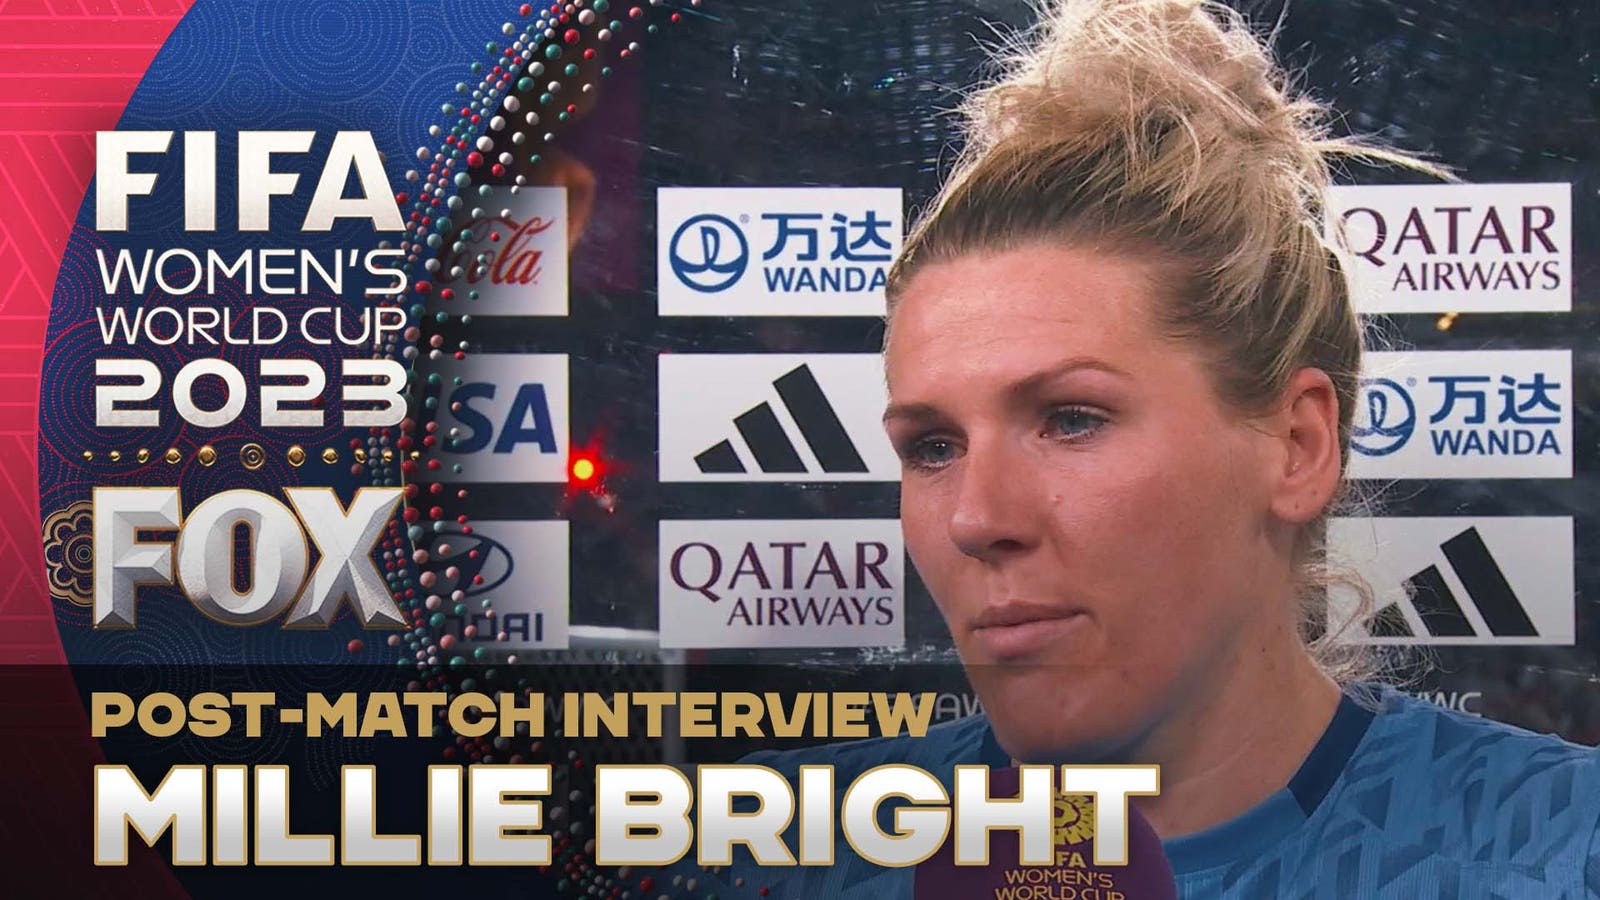 'It's a proud moment' - England's Millie Bright after loss to Spain in World Cup Final